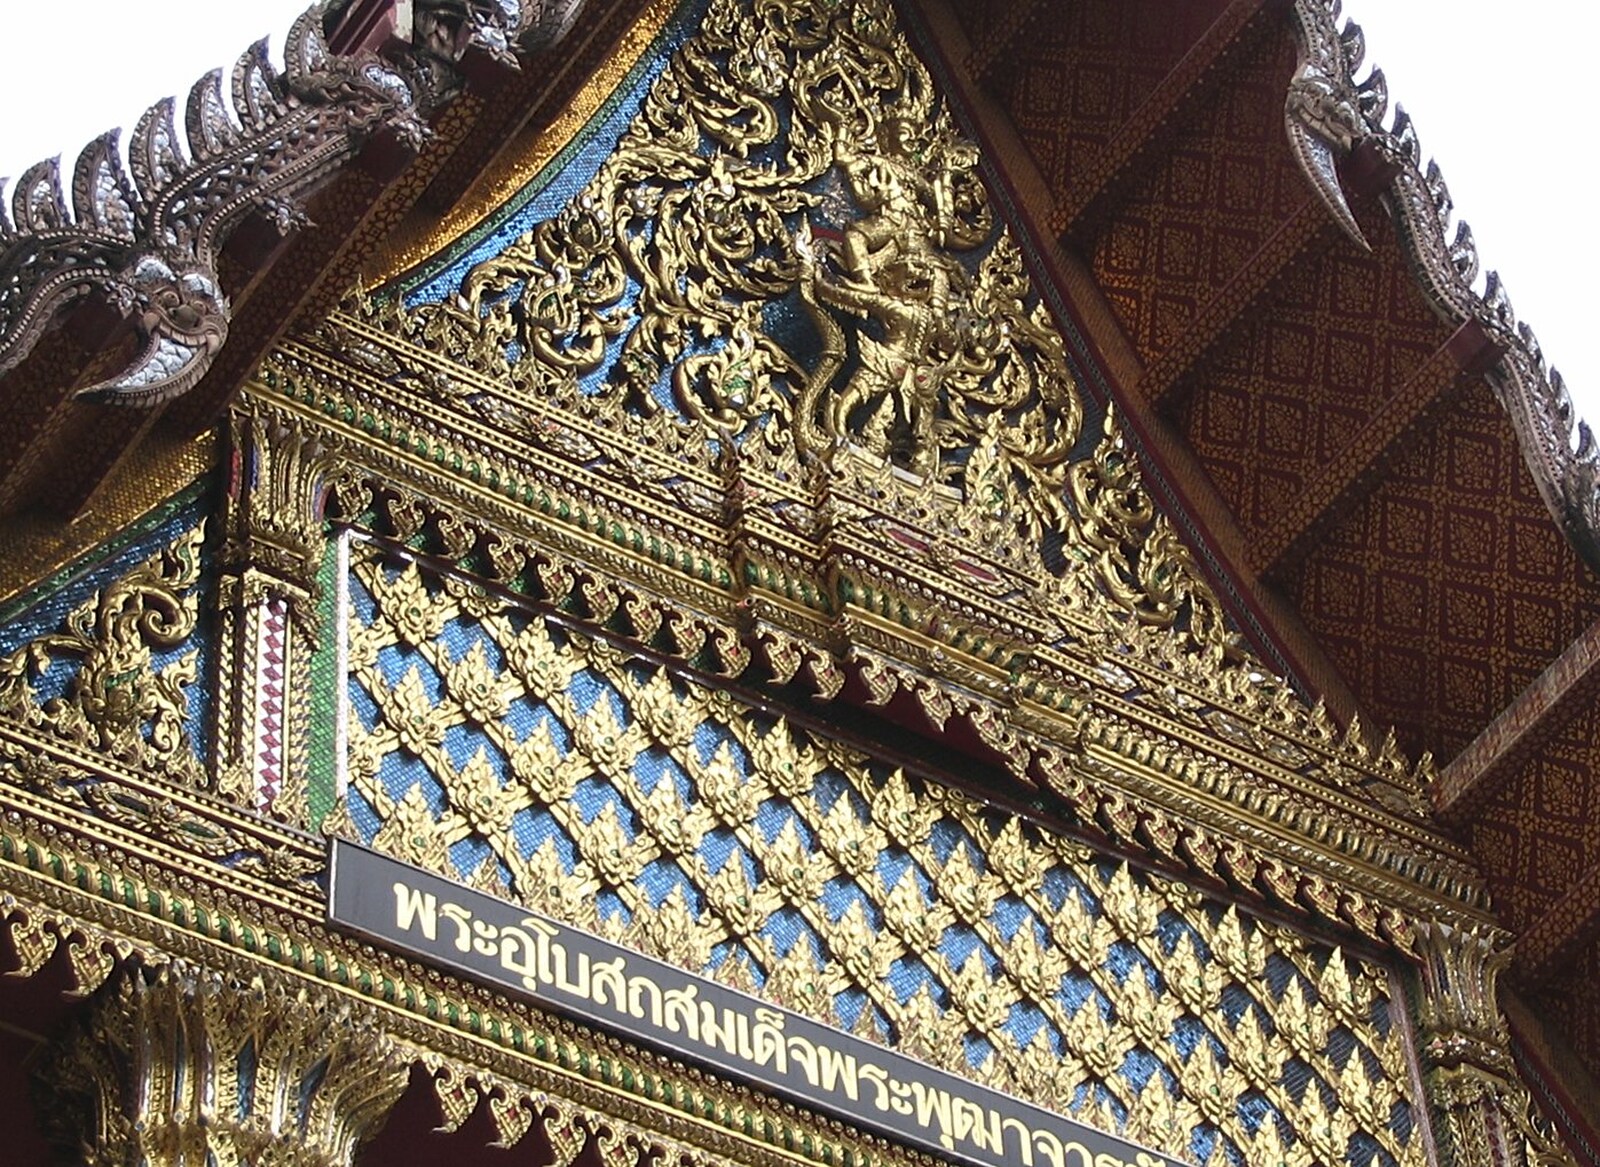 An incredibly-ornate temple building from A Working Trip to Bangkok, Thailand - 2nd October 2004